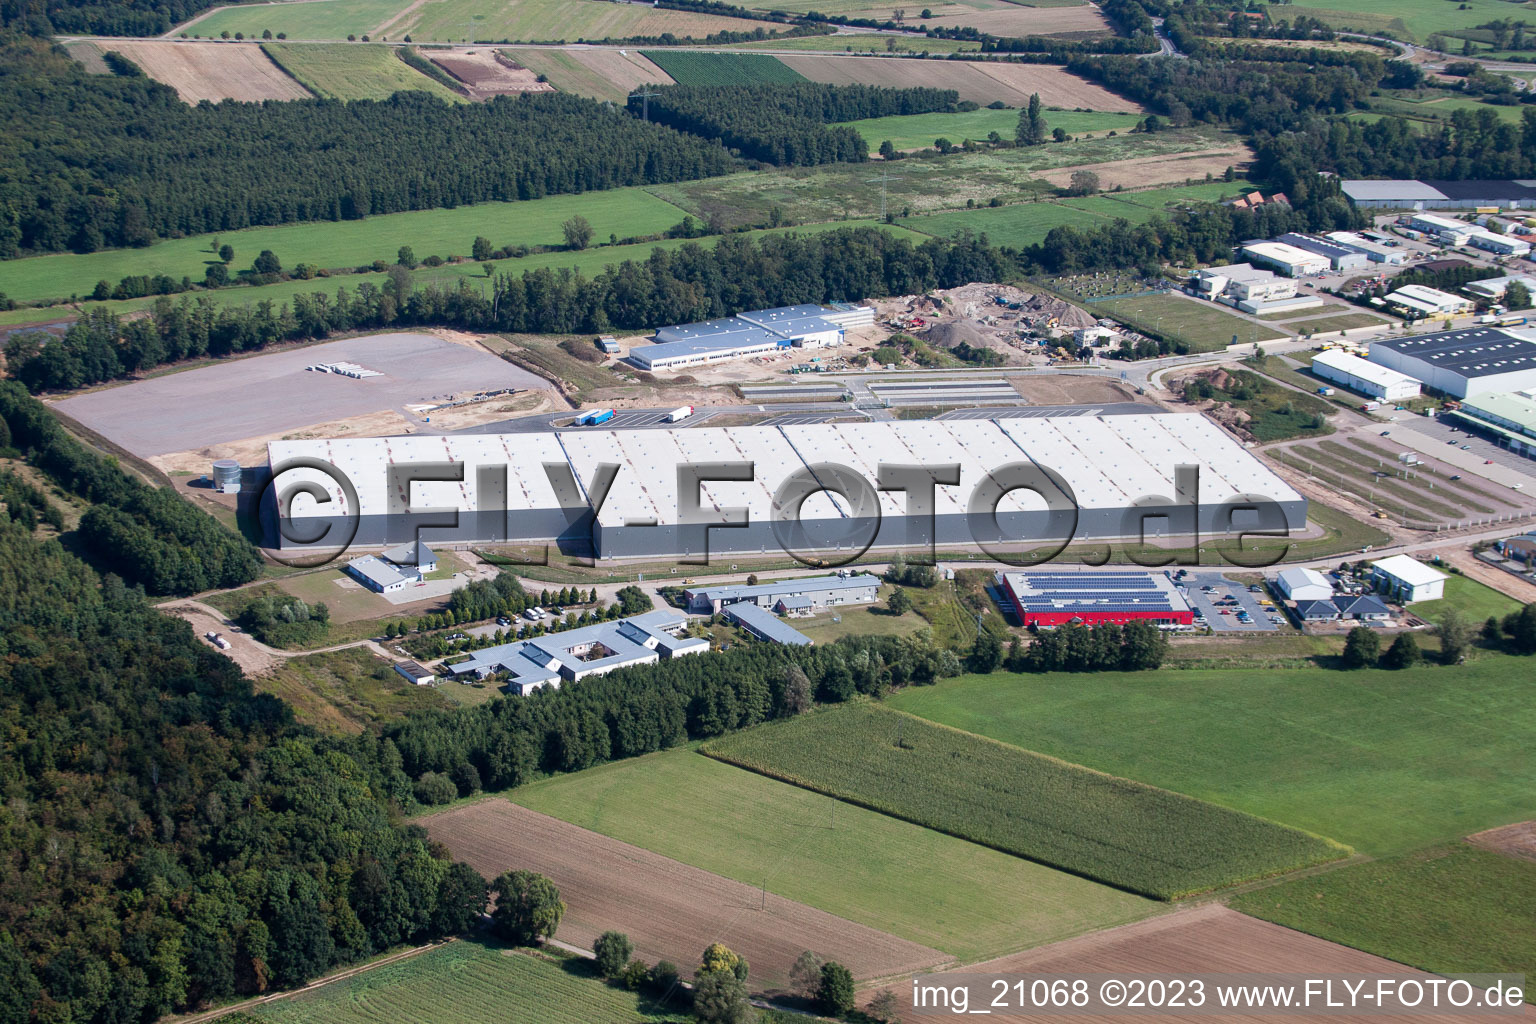 Coincidence logistics center in the district Minderslachen in Kandel in the state Rhineland-Palatinate, Germany from the drone perspective